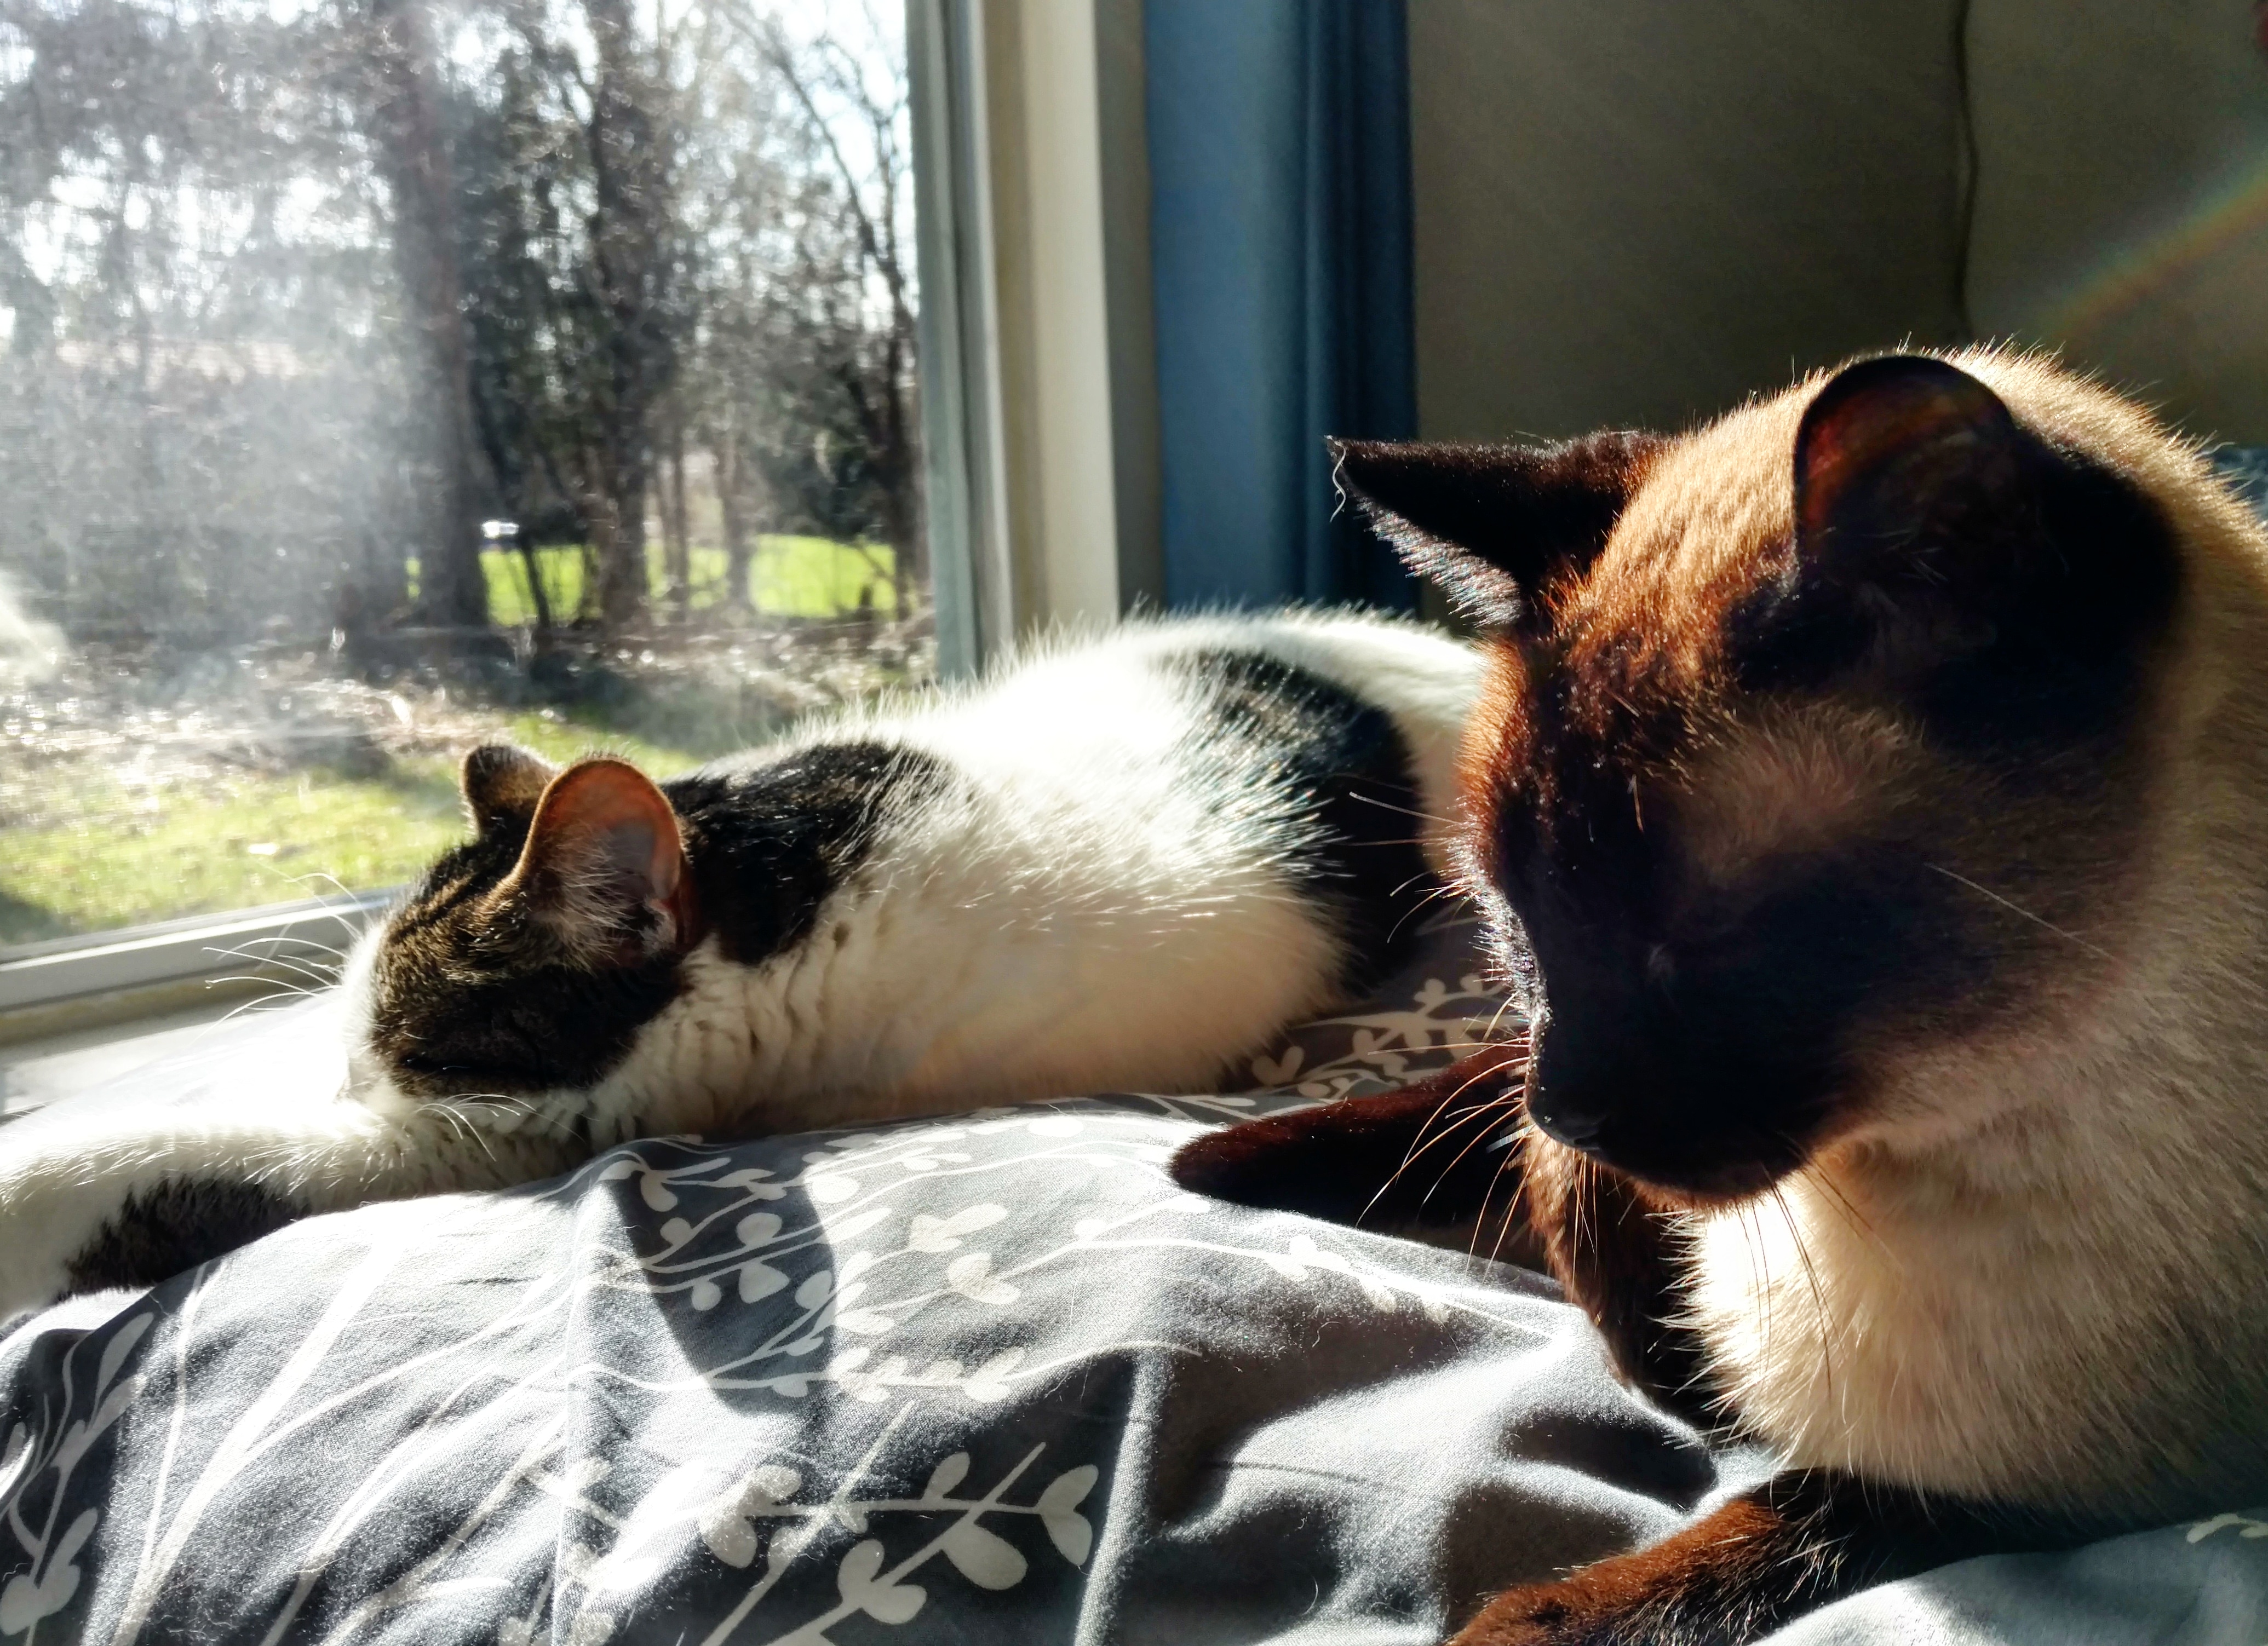 A photo of two cats sleeping in the sun.